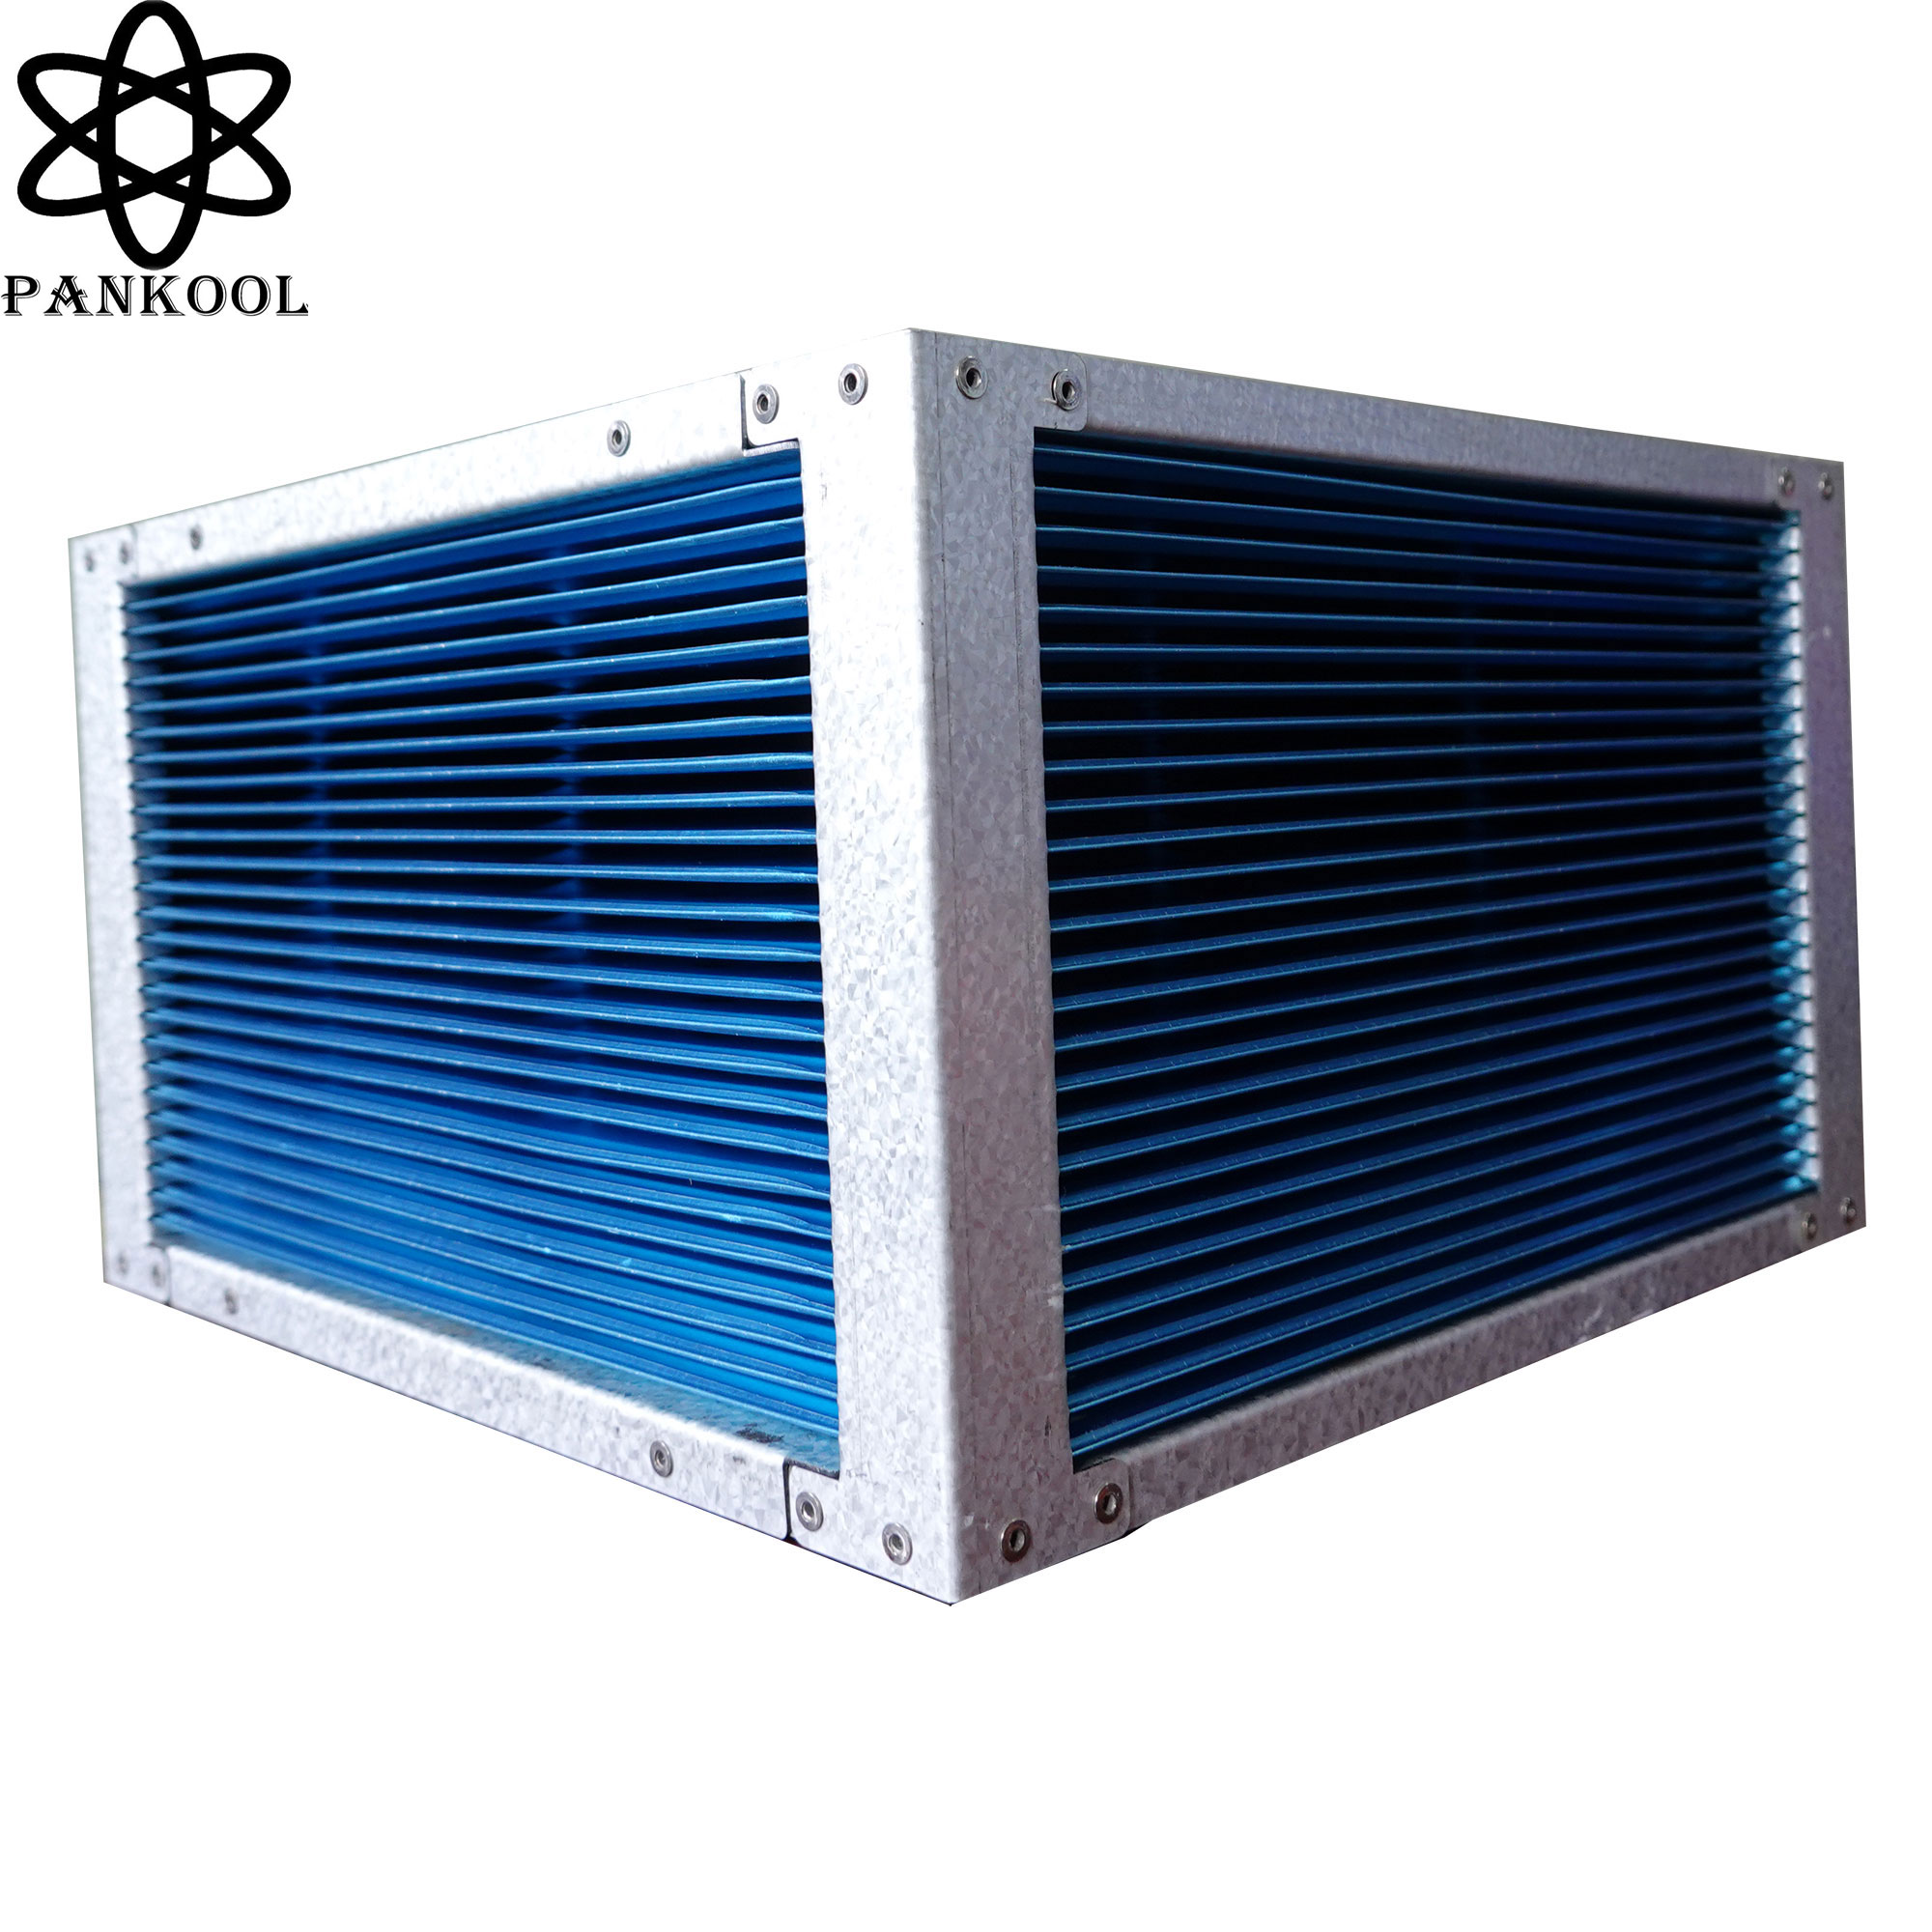 High-Quality Air to Air Heat Exchanger For A Sauna - Factory Direct Prices